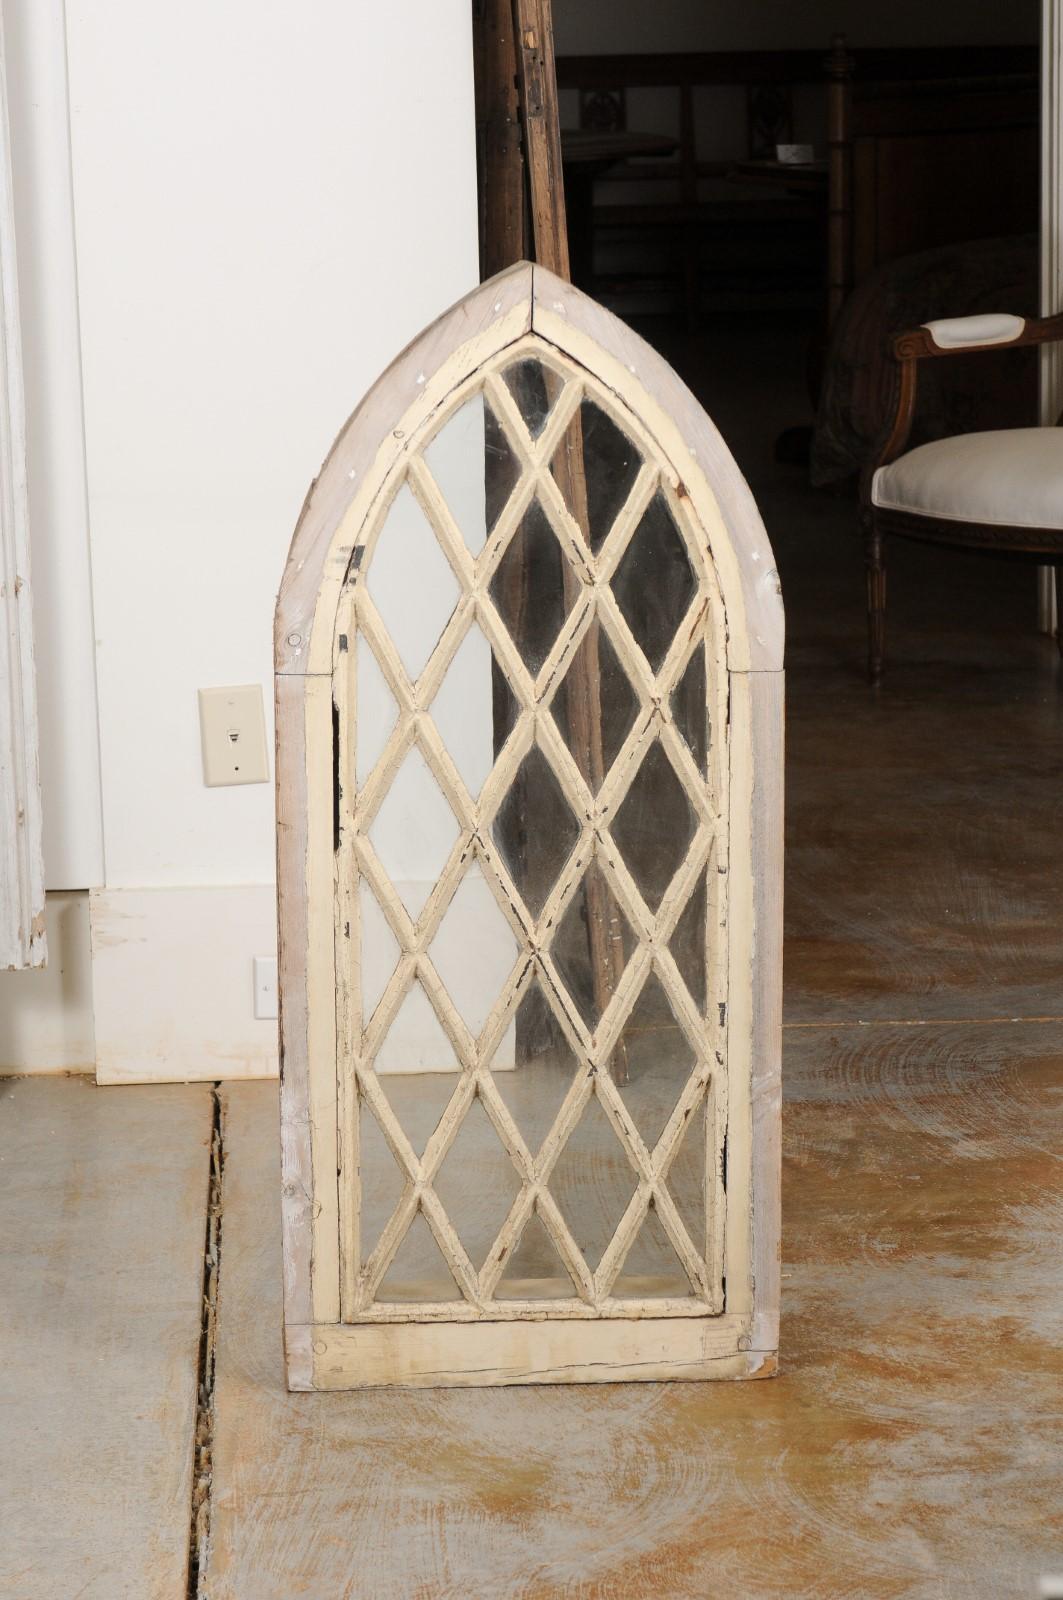 An English Gothic Revival painted wood broken arch church window frame from the 19th century, with latticed mullions and original finish. Created in England during the 19th century, this Gothic Revival window will make for an excellent decorative